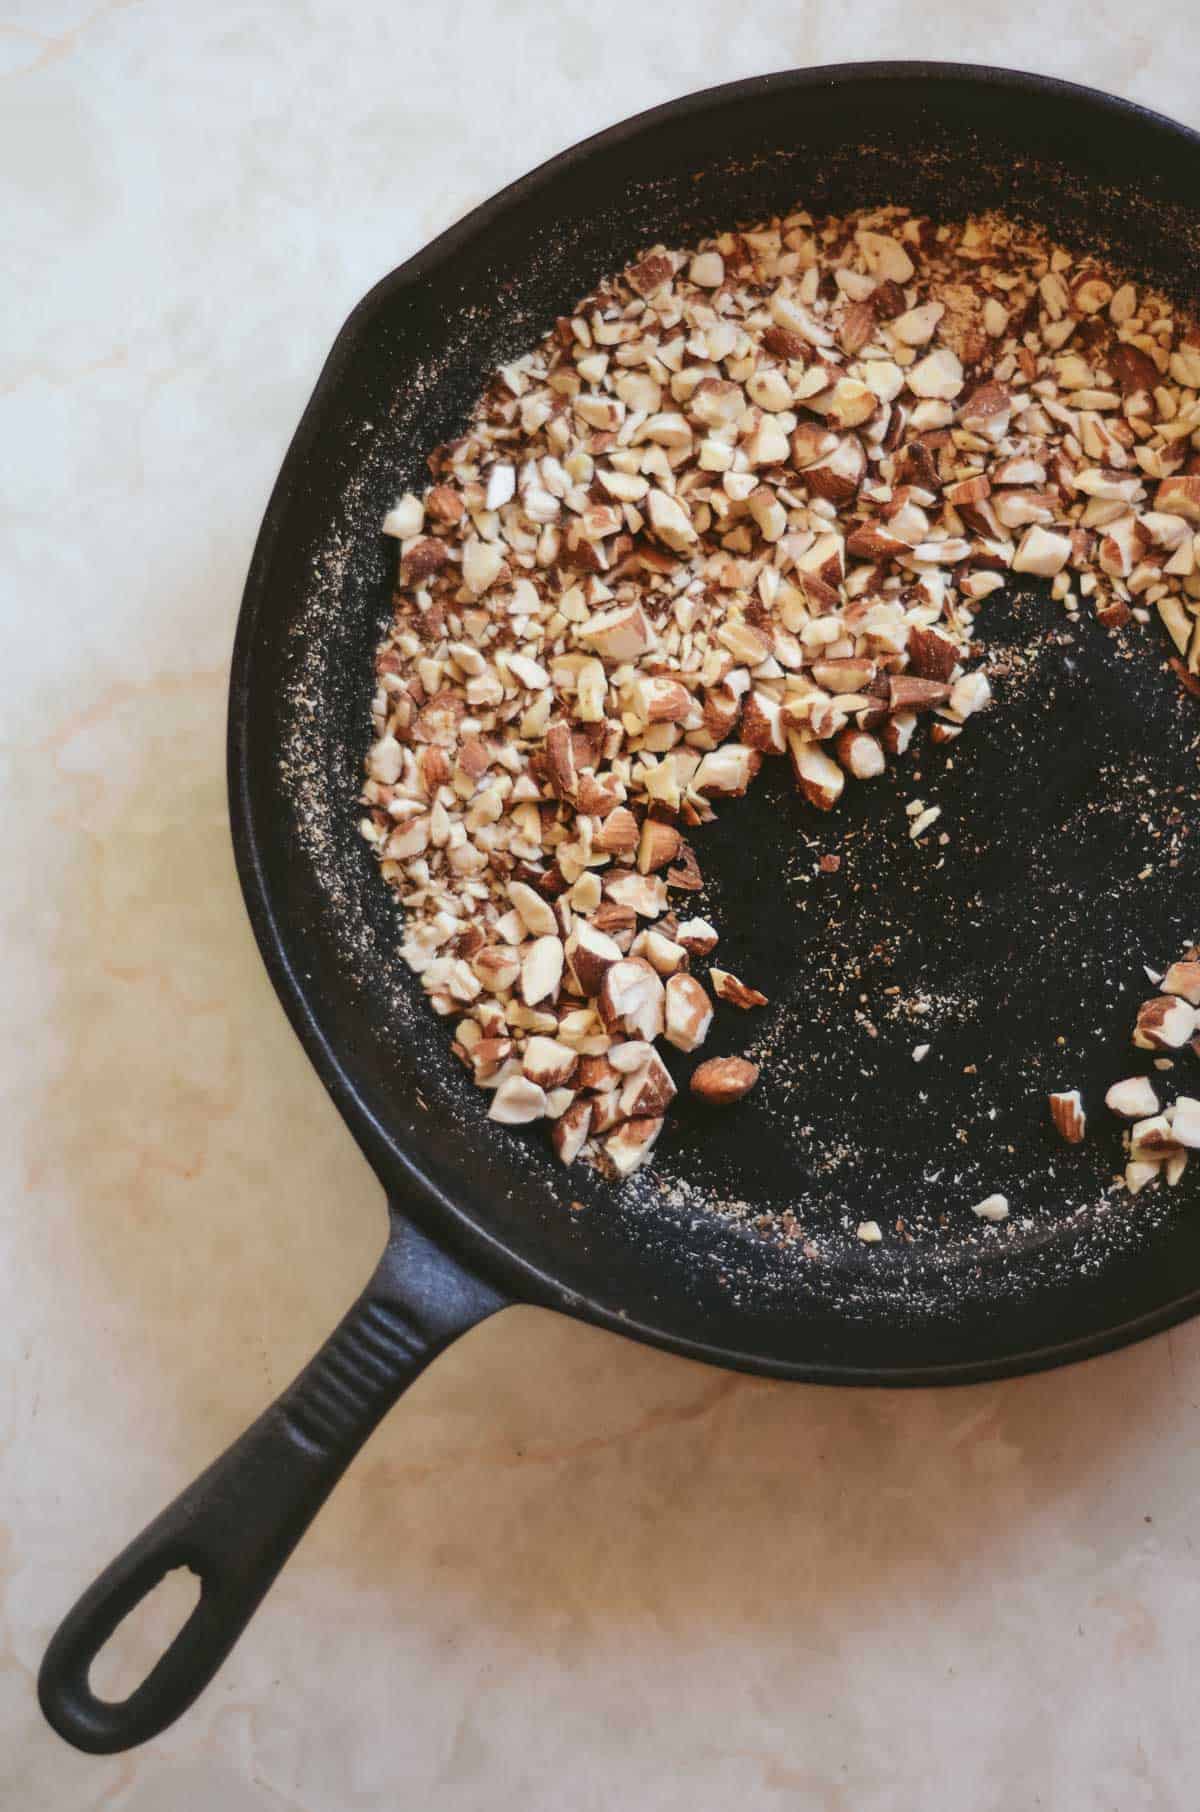 Chopped almonds in a cast iron fry pan.